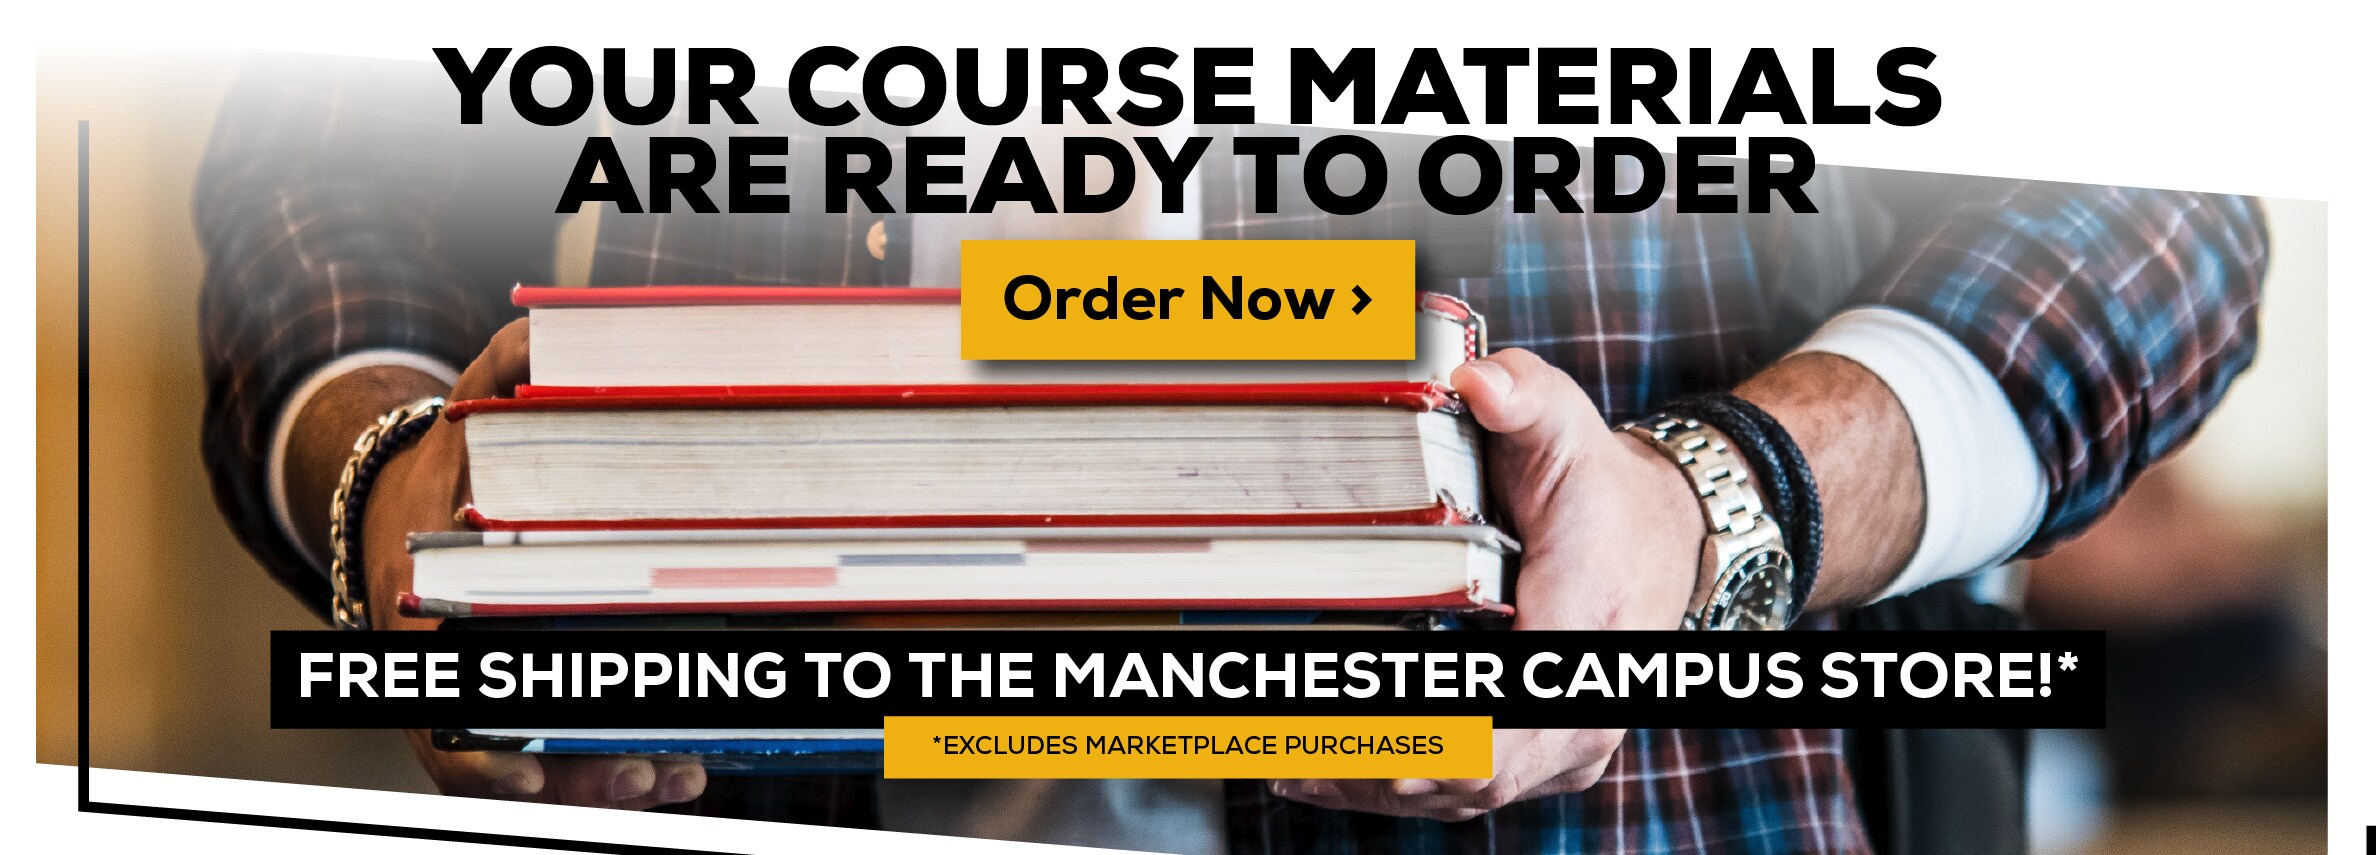 Your Course Materials are Ready to Order. Order Now. Free shipping to Manchester Campus store! *Excludes marketplace purchases.